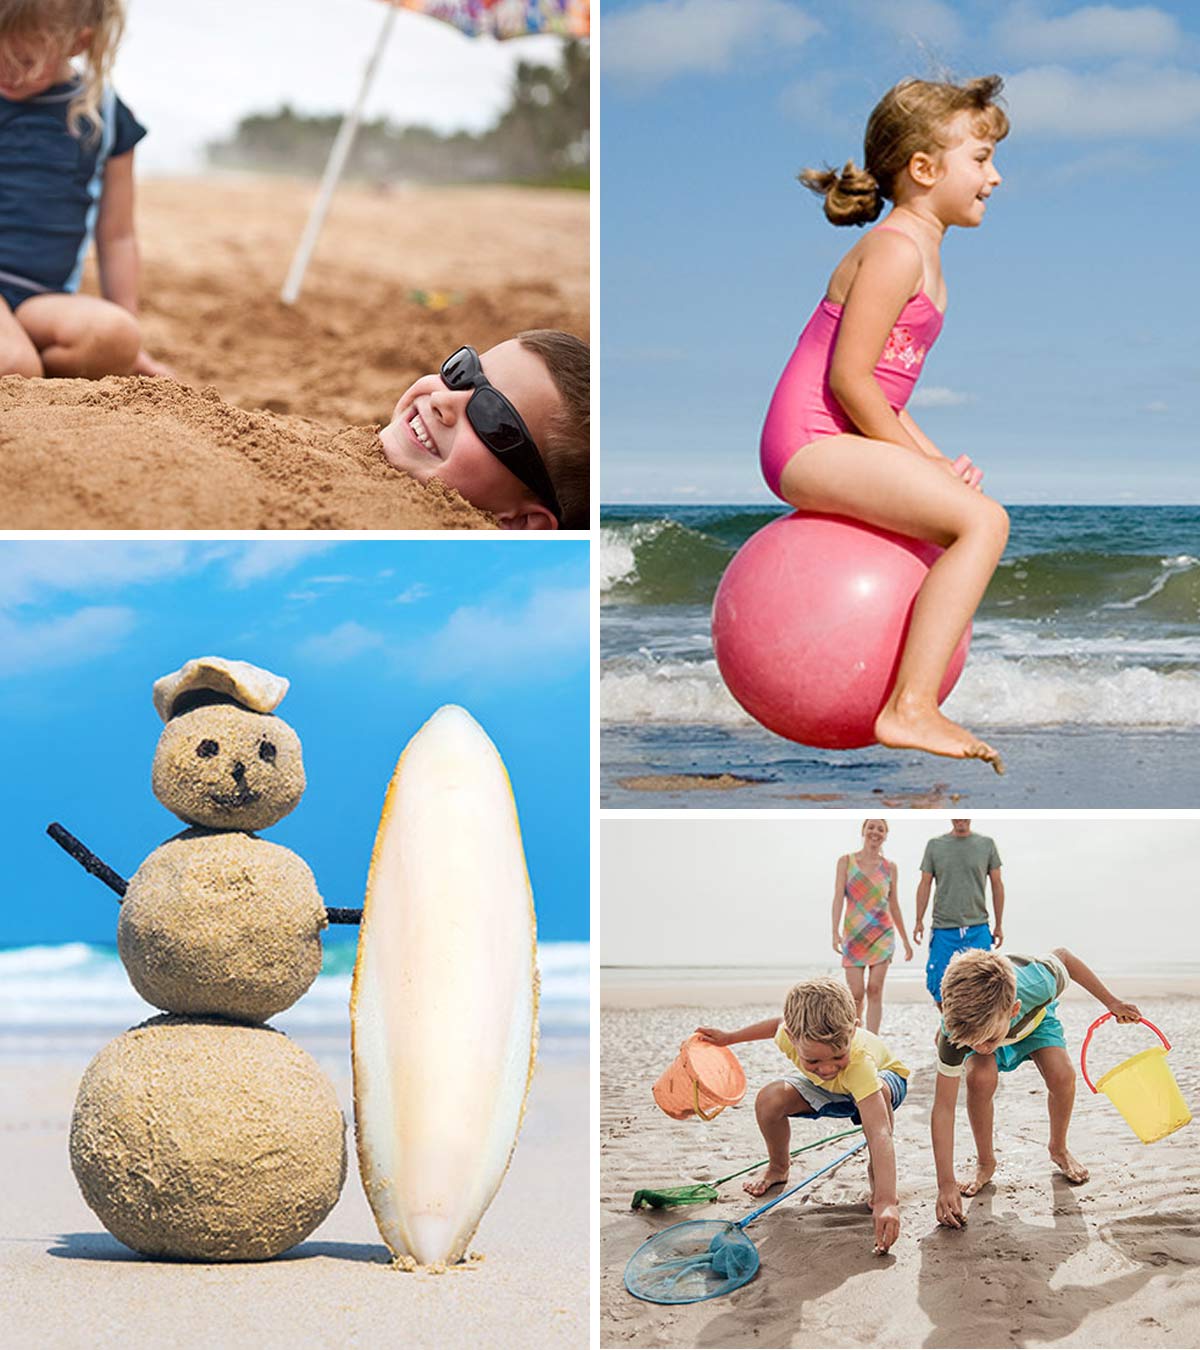 25 Fun Beach Games And Activities For Kids To Play - MomJunction